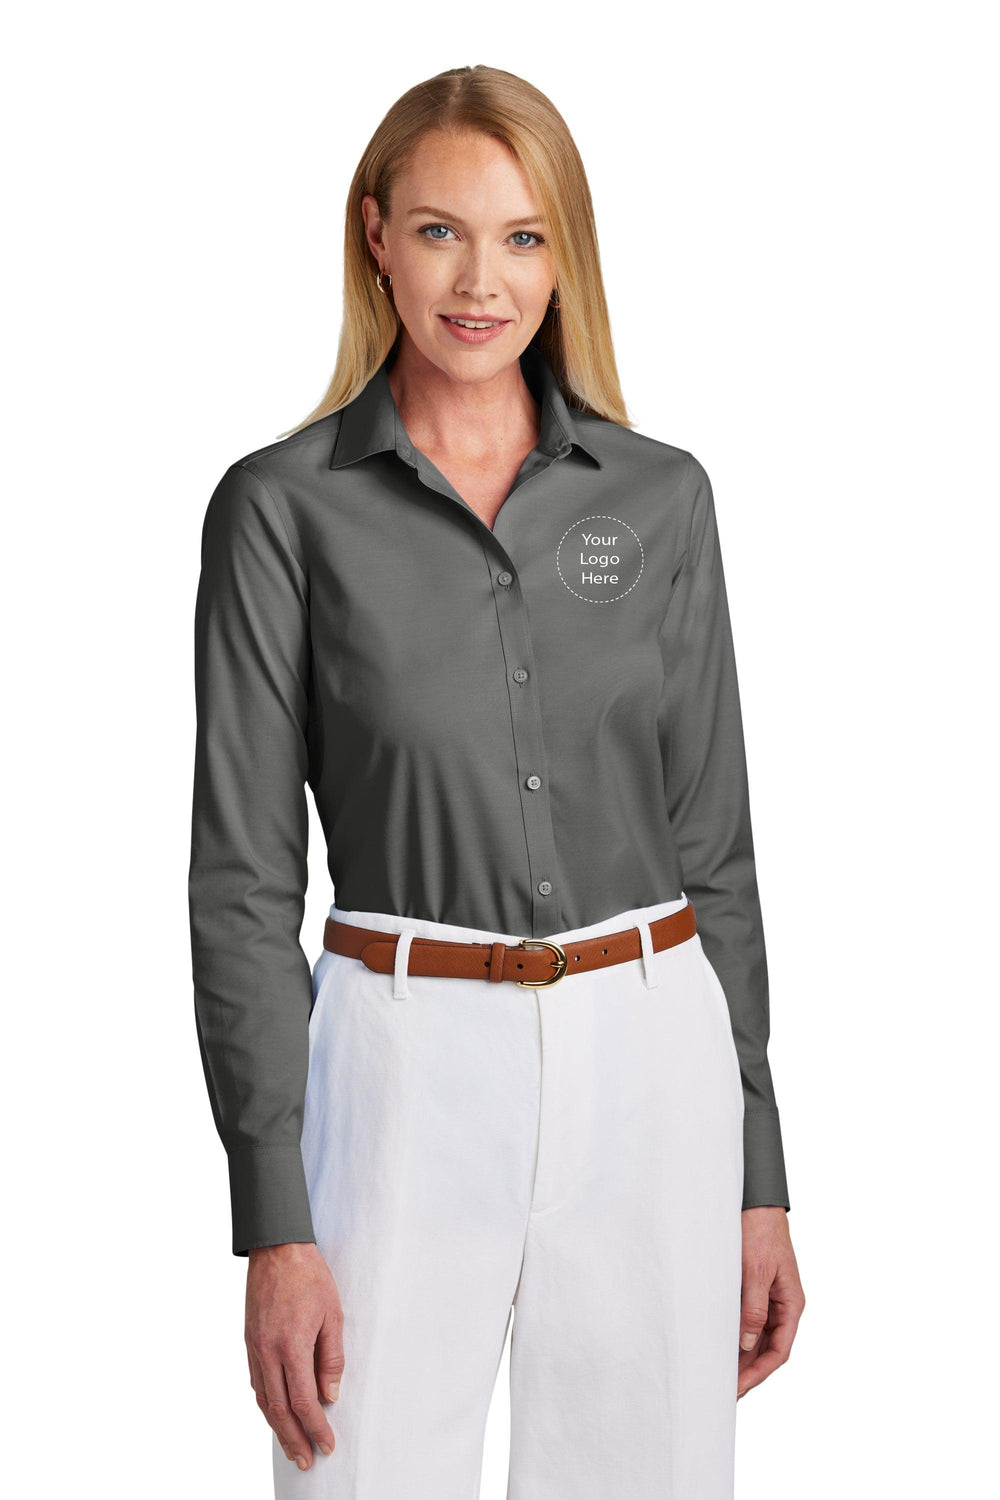 Keller Williams NEW KW-BB18001 Brooks Brothers® Women’s Wrinkle-Free Stretch Pinpoint Shirt 